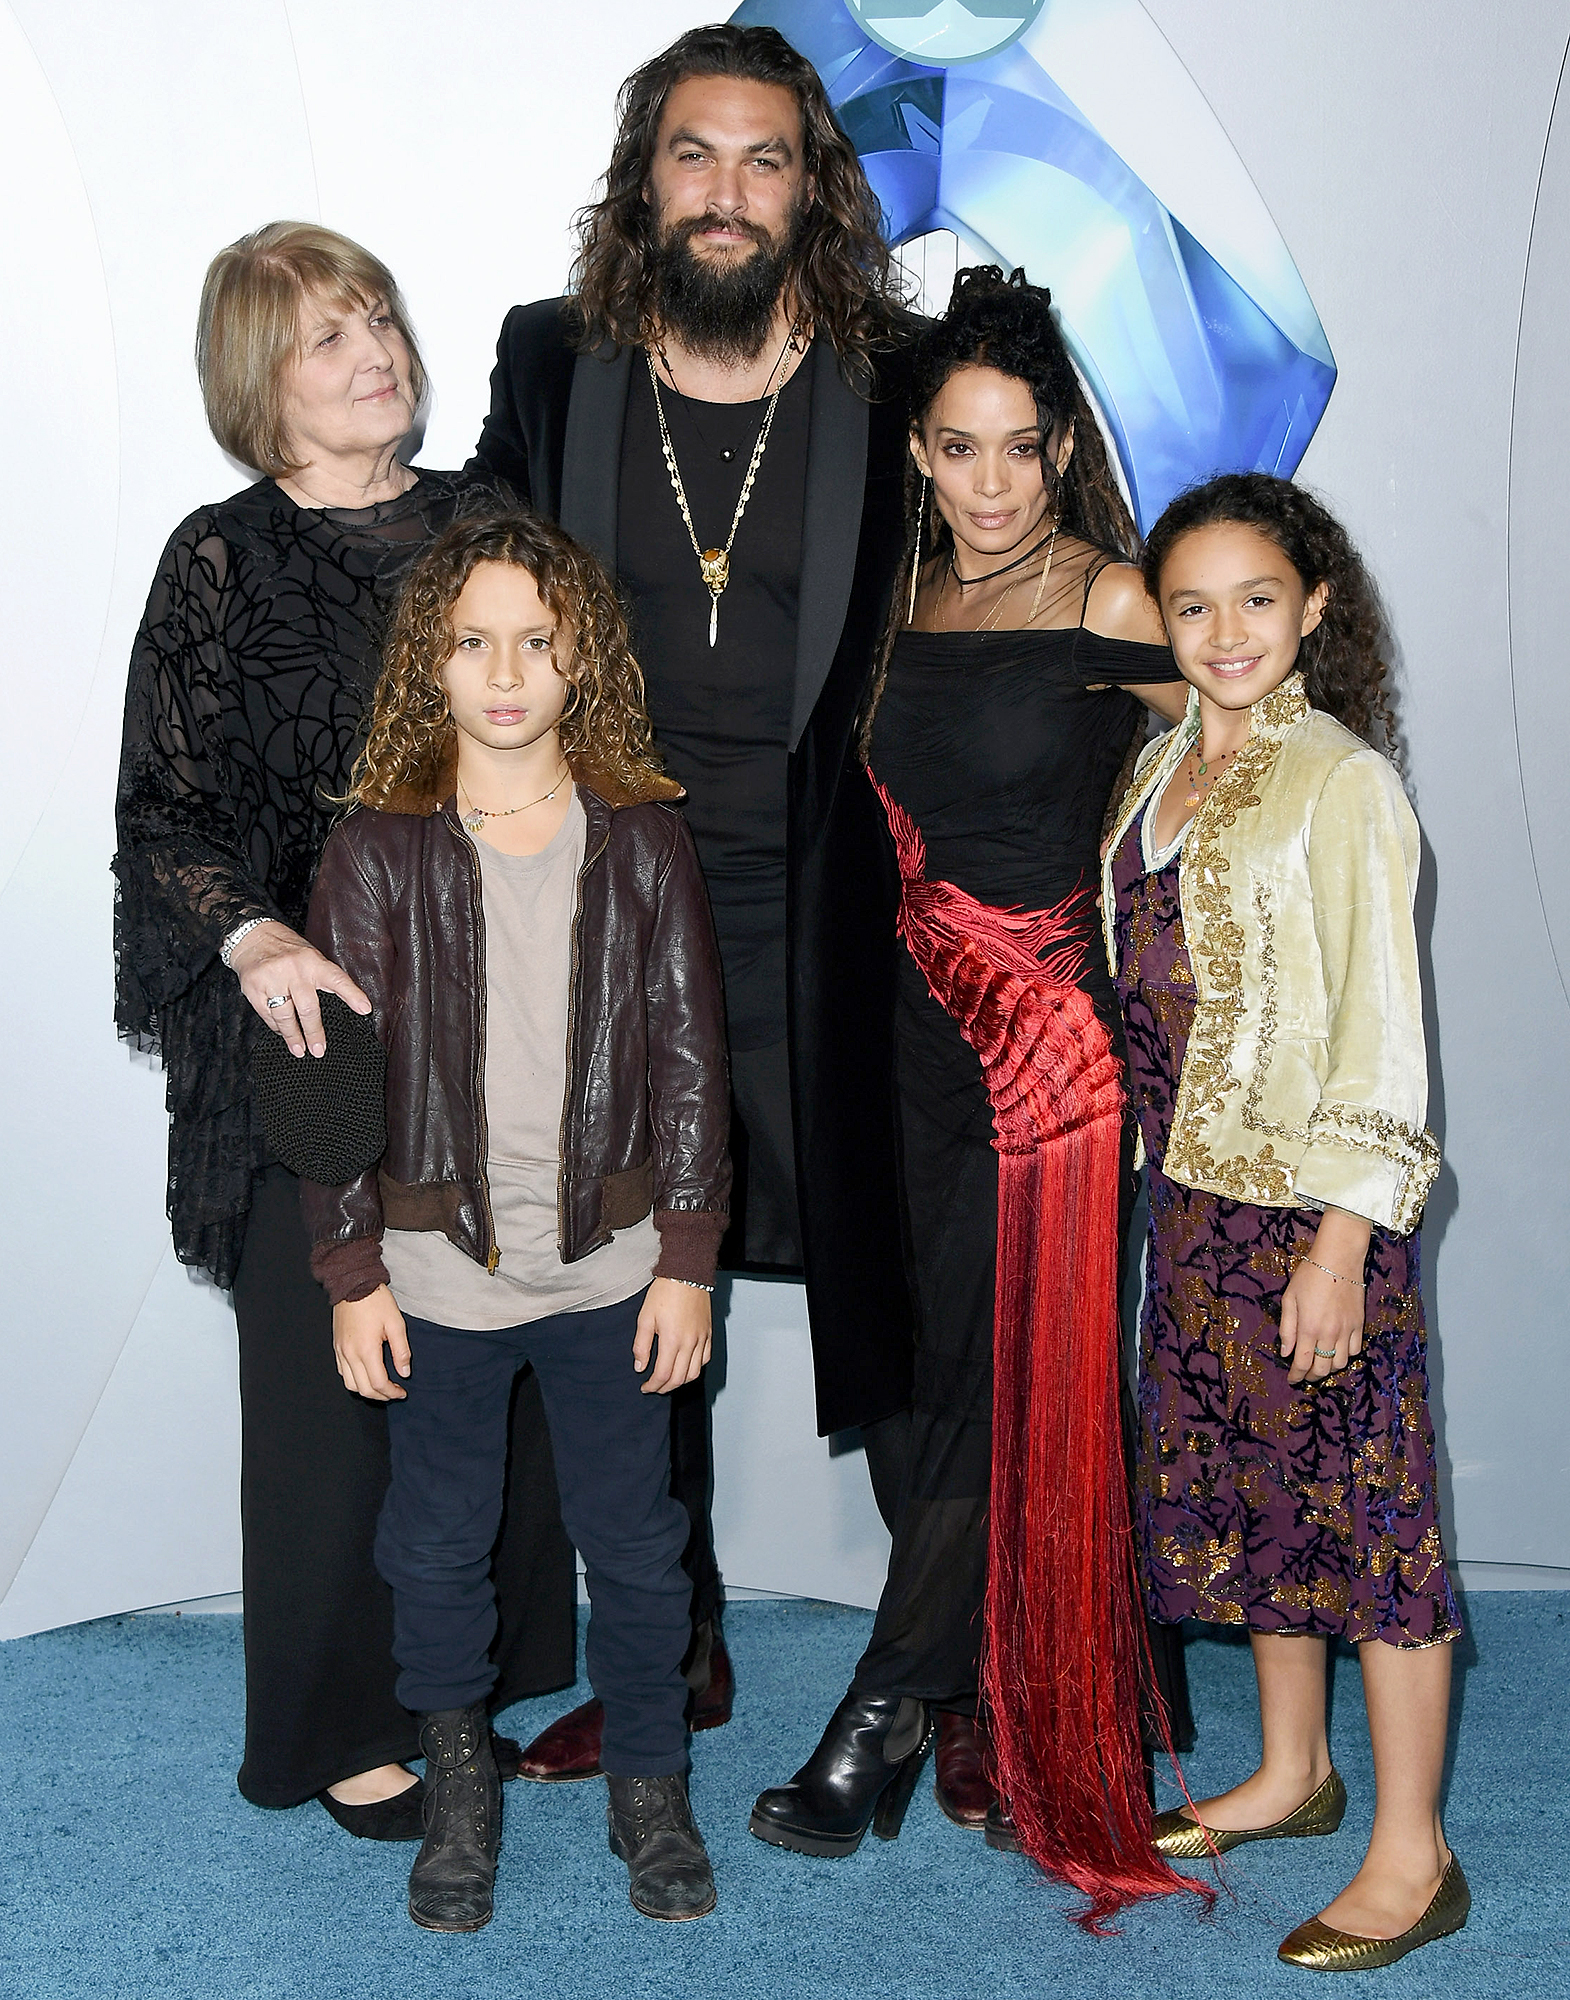 20 Pics Of Jason Momoa And His Kids That Make Us Swoon Every Time